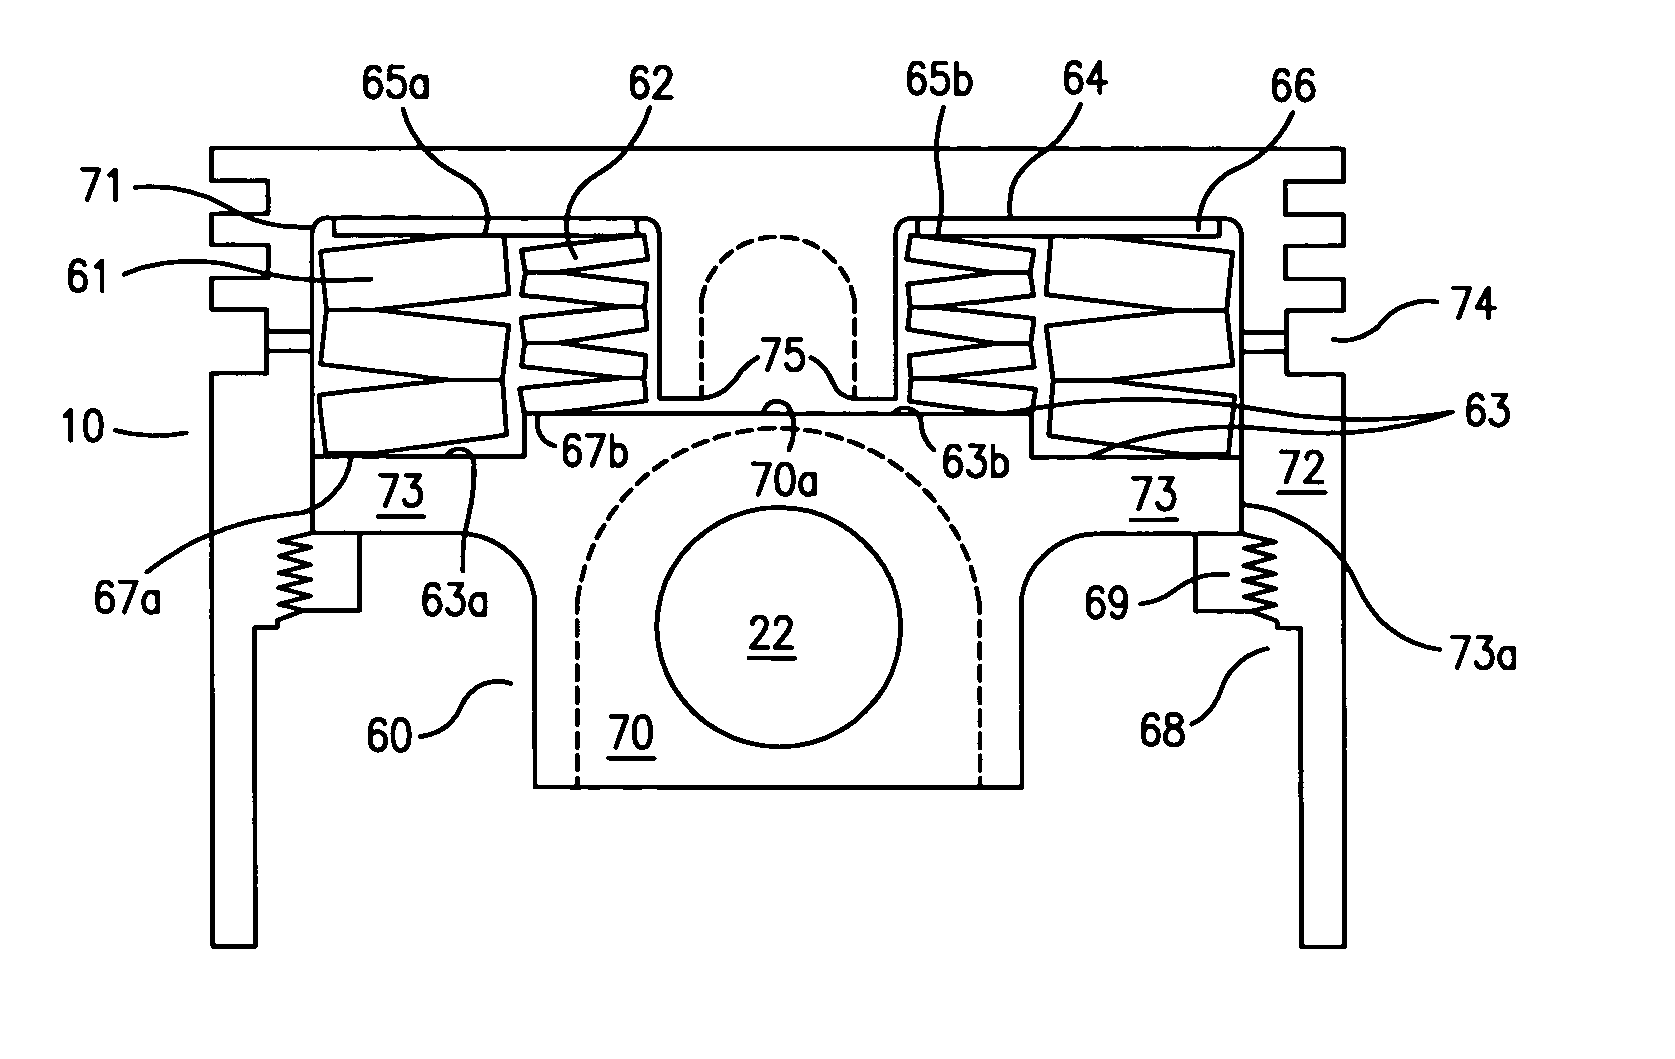 High efficiency high power internal combustion engine operating in a high compression conversion exchange cycle